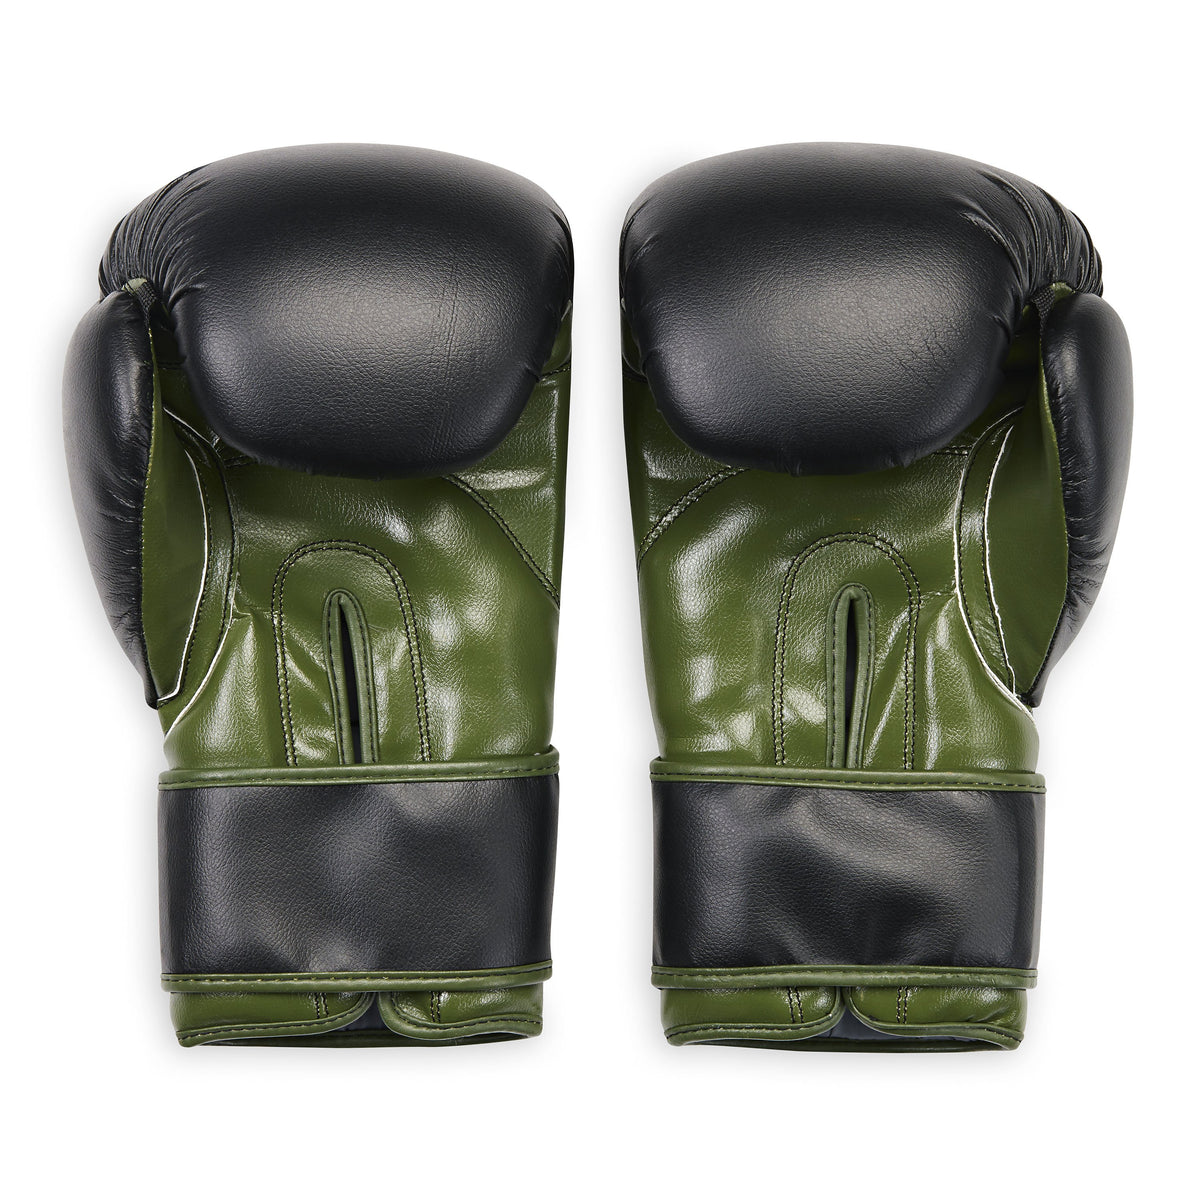 green and black boxing gloves inside